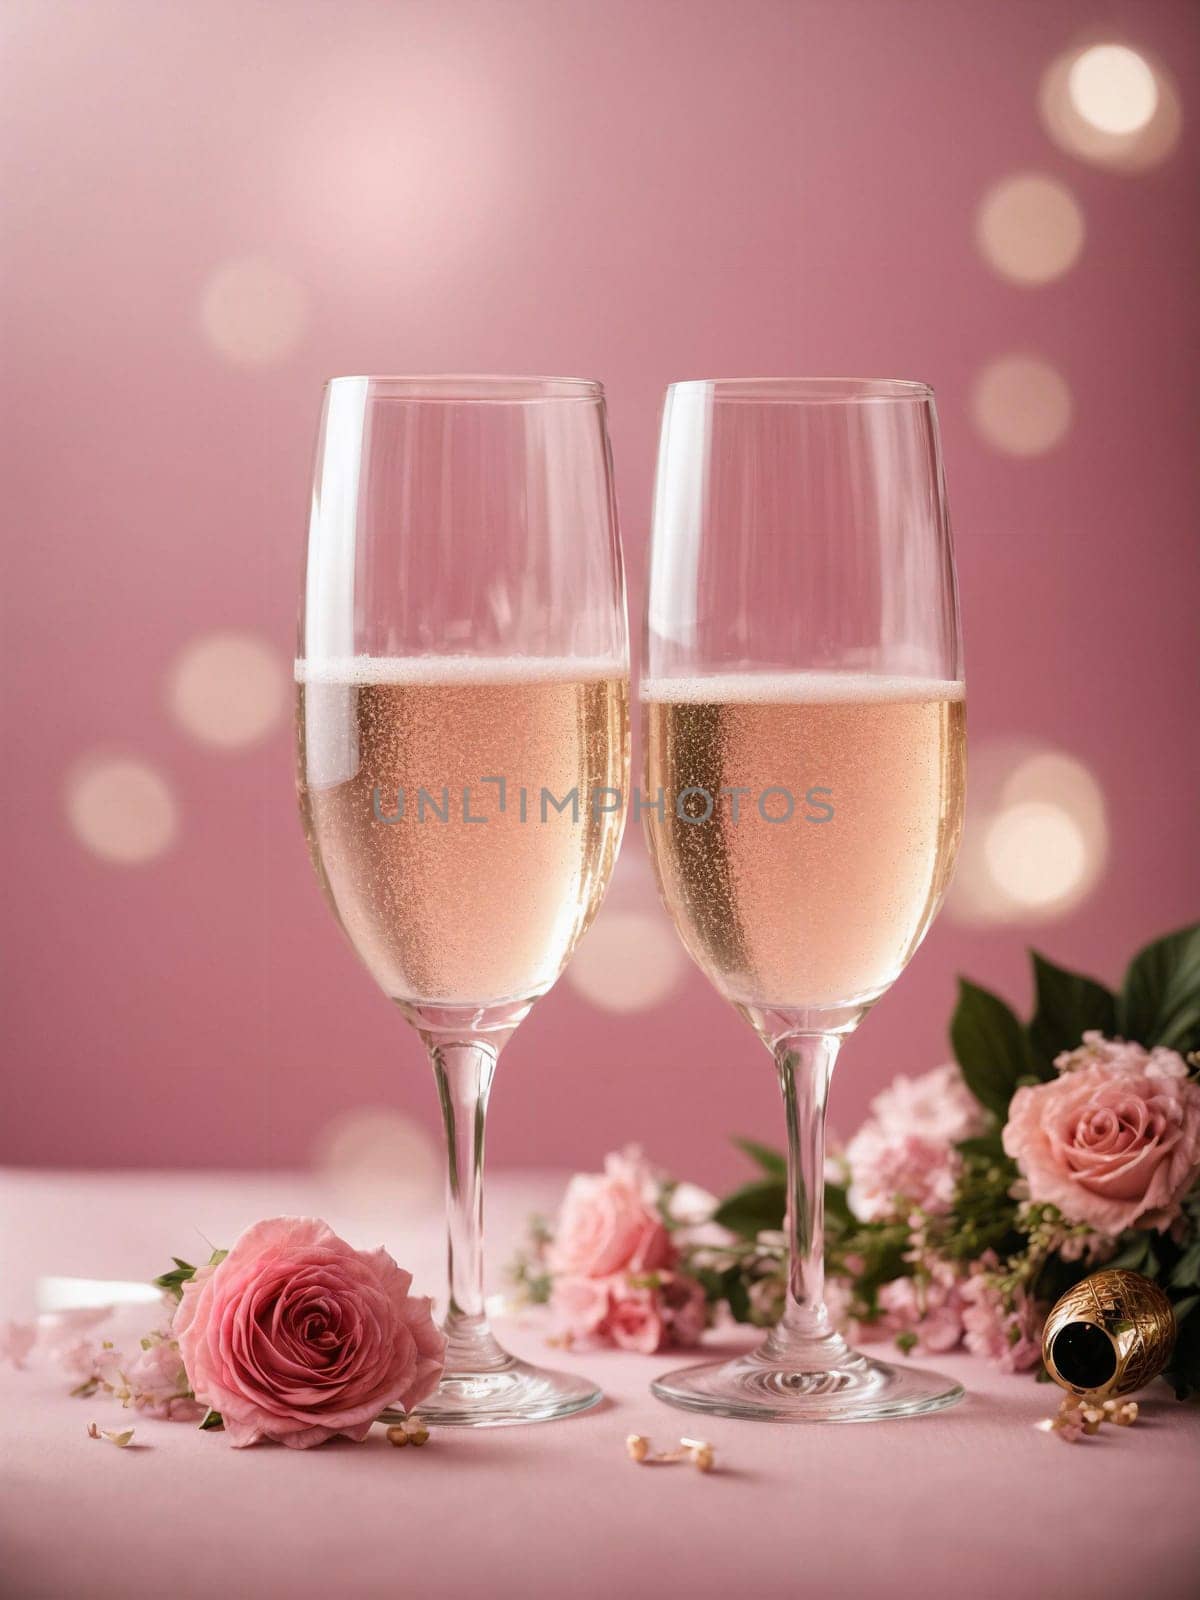 Two champagne glasses on a pink background by Севостьянов